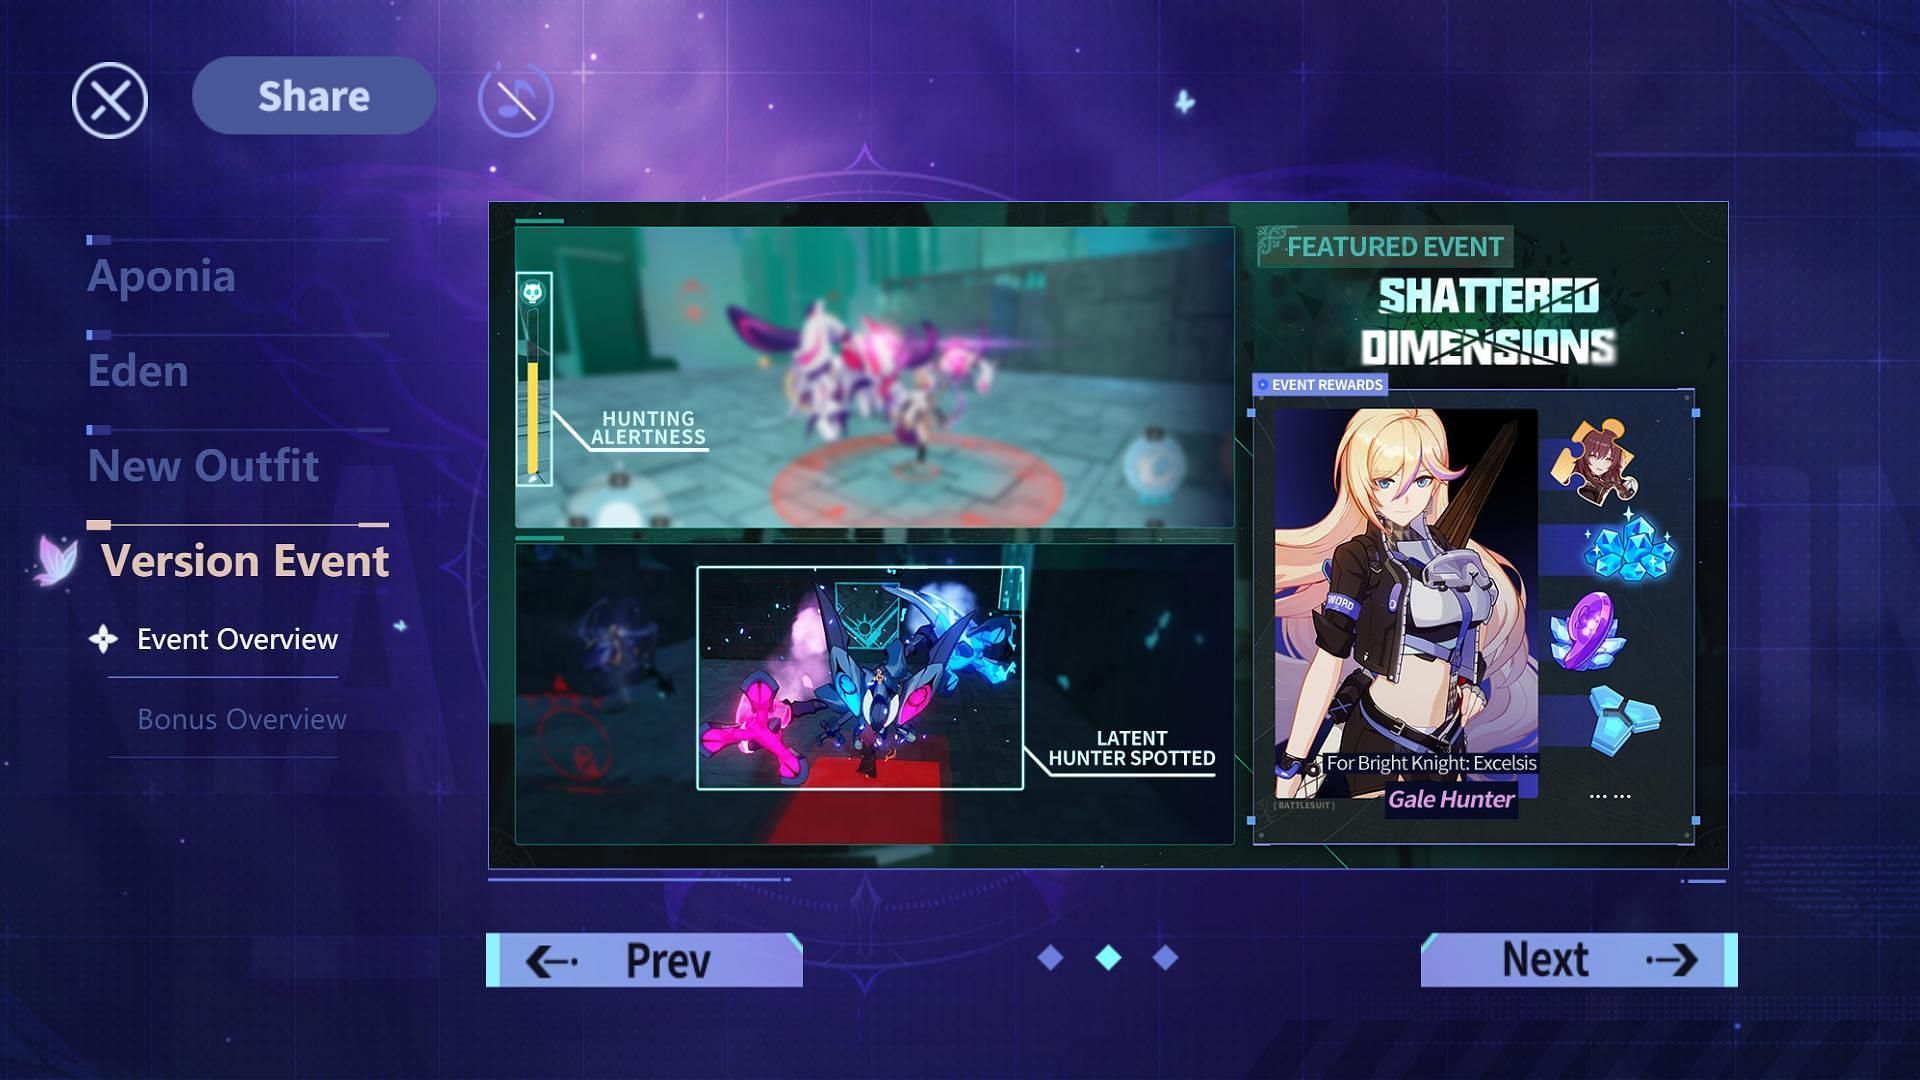 The Shattered Dimensions event gives free rewards (Image via Honkai Impact 3rd)